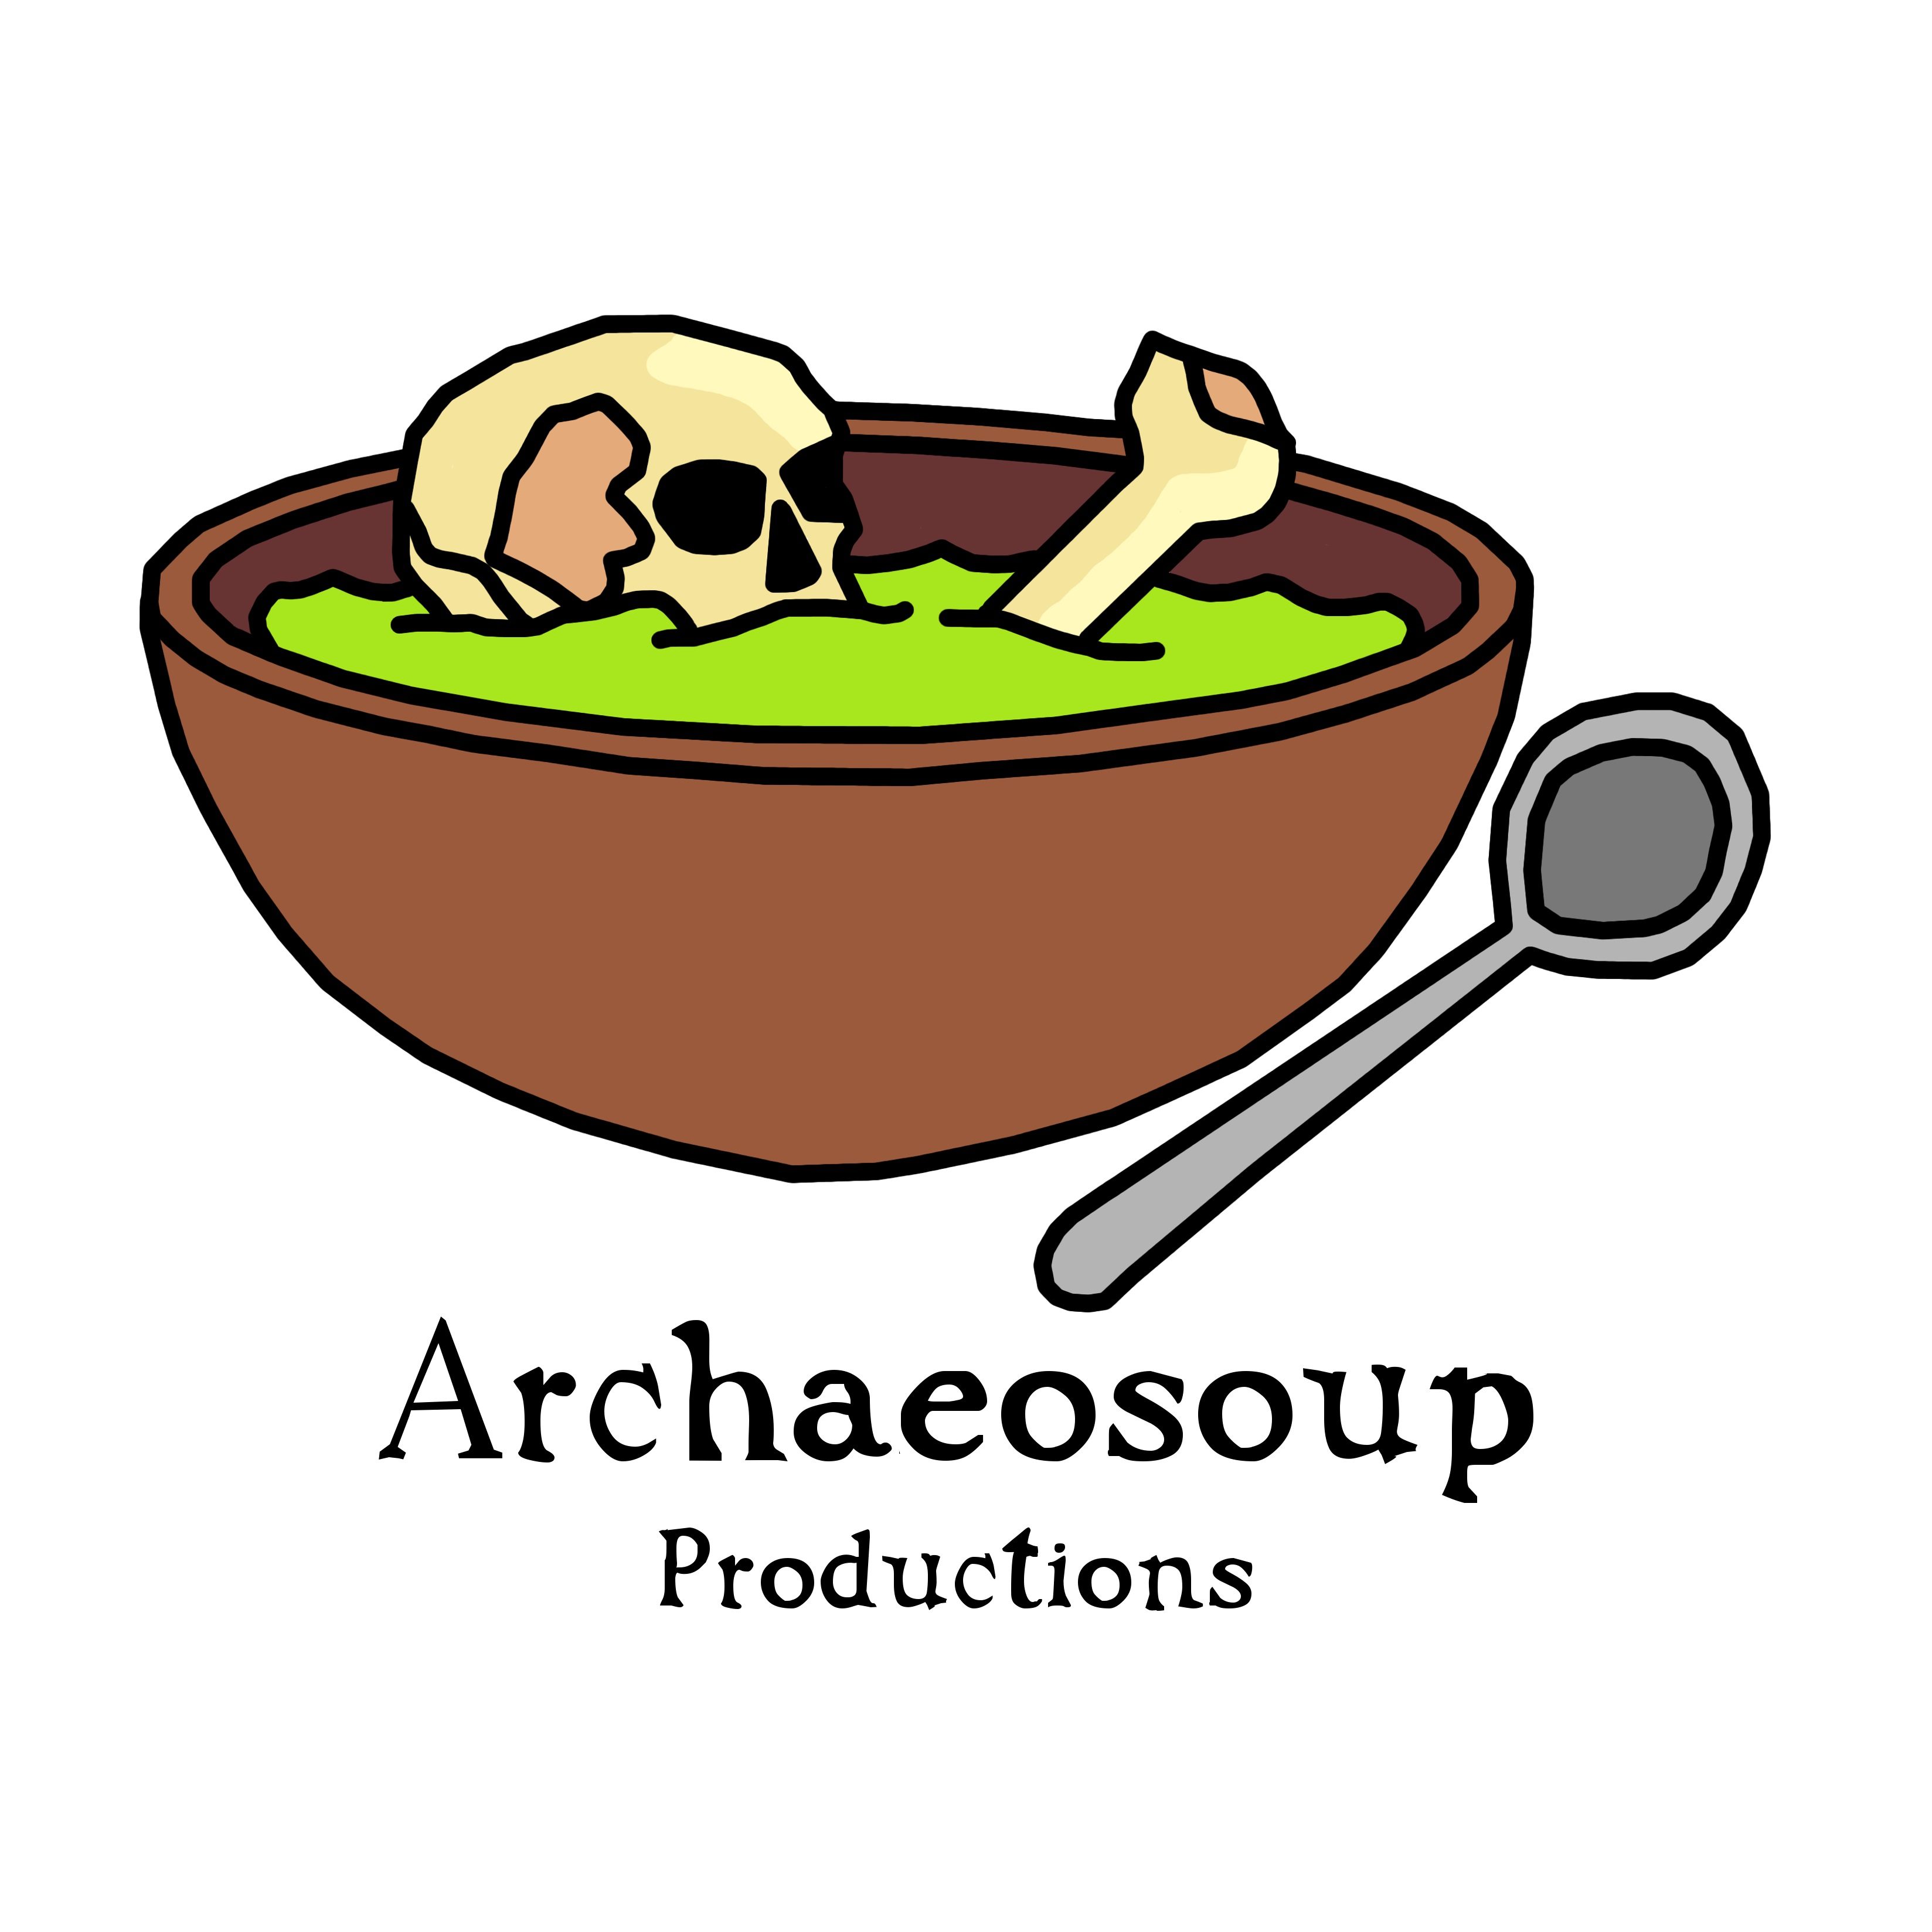 Archaeosoup Towers